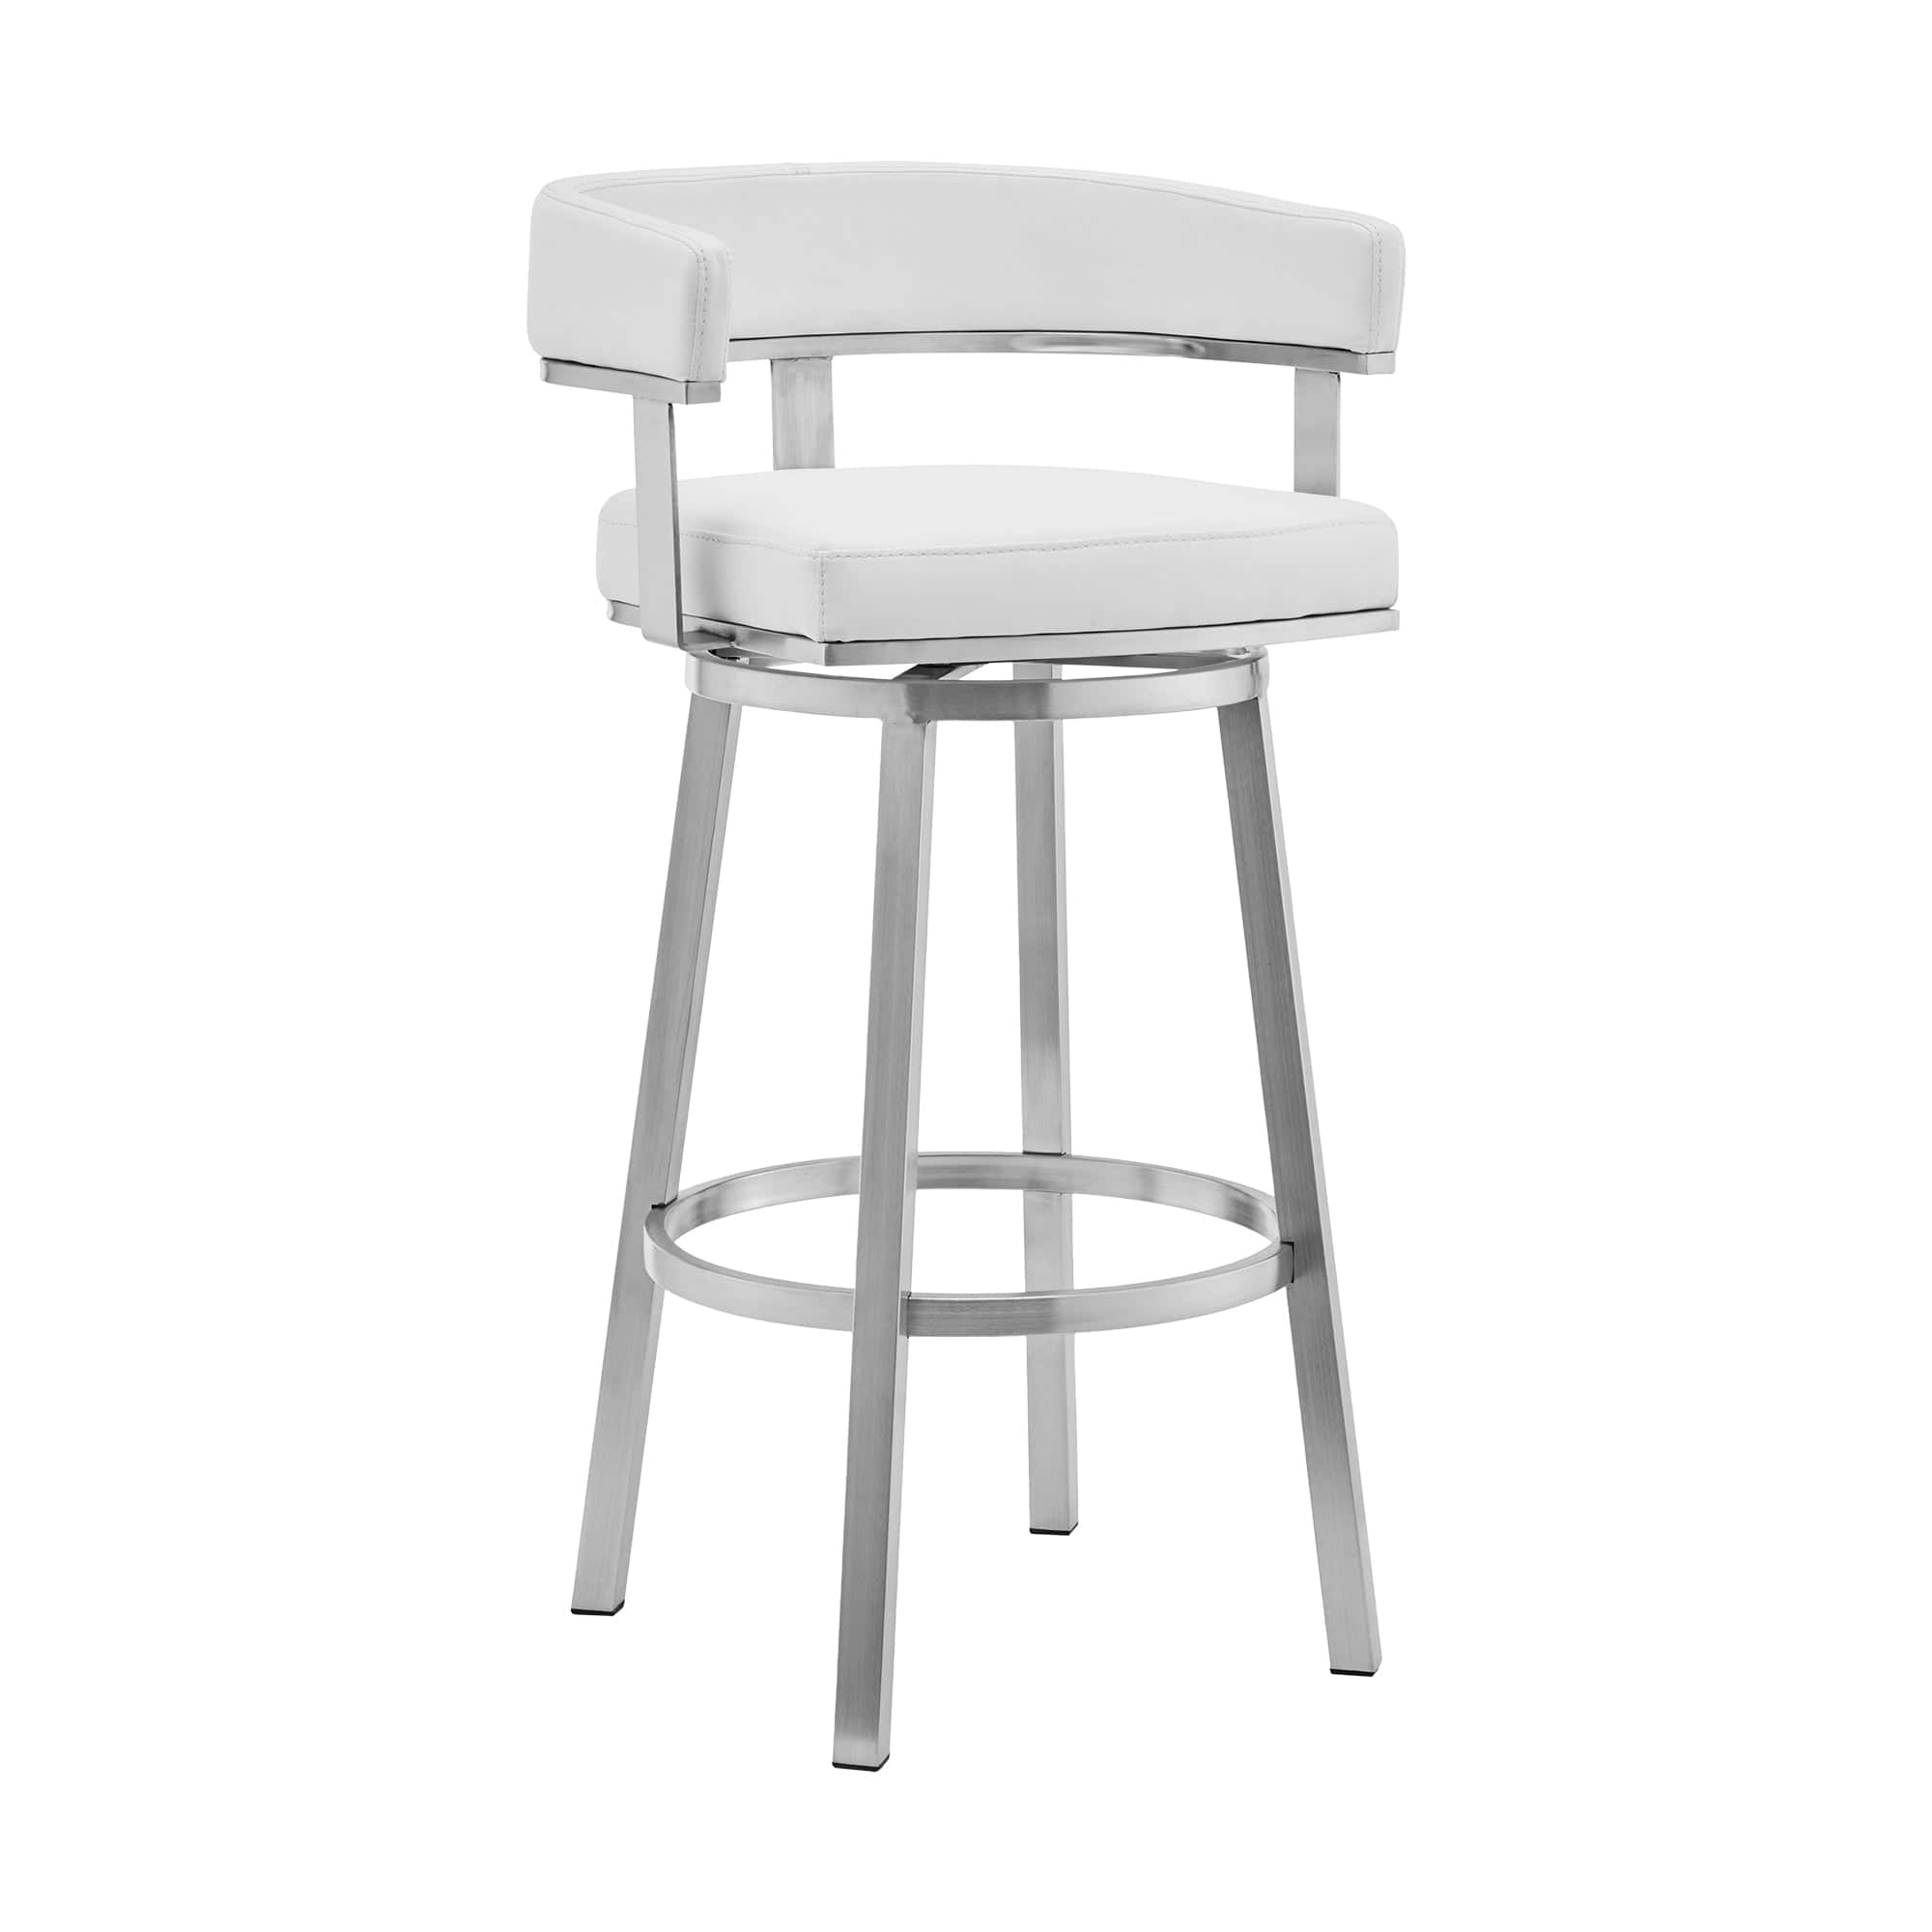 Armen Living Barstool White Faux Leather Armen Living - Lorin 30" Black Faux Leather and Brushed Stainless Steel Swivel Bar Stool | LCLRBABSBL30